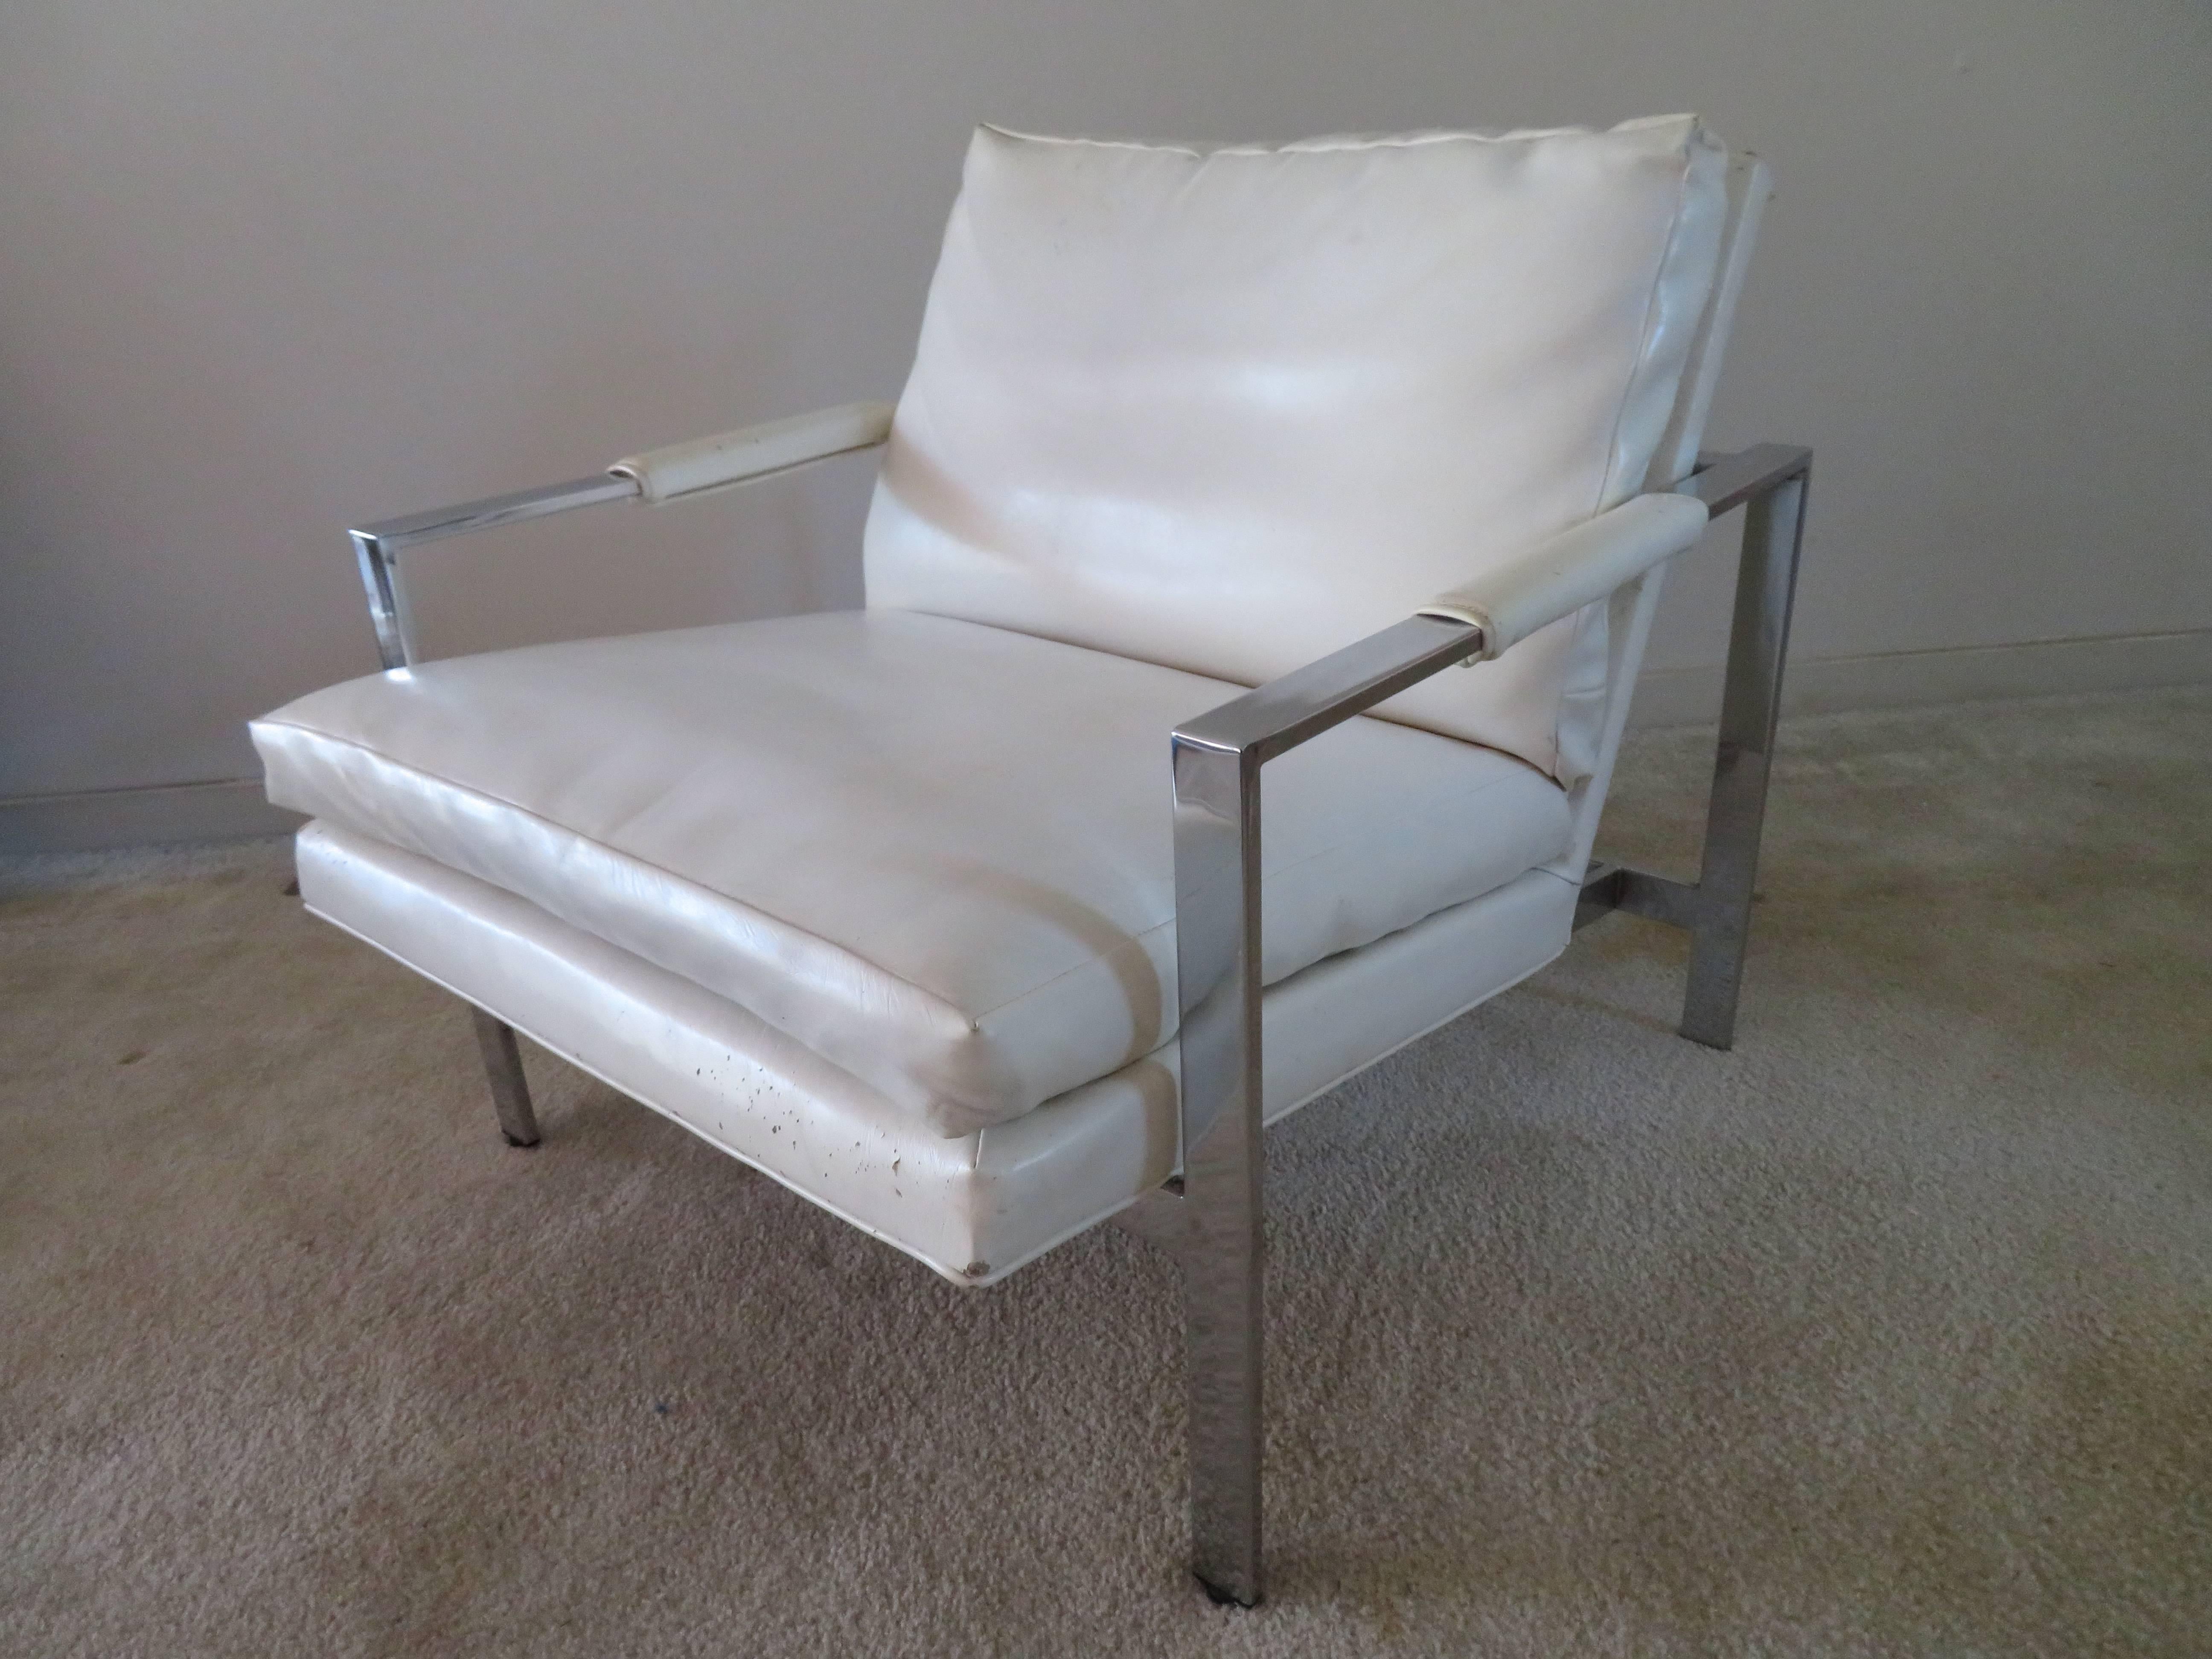 Lovely Milo Baughman chrome flatbar lounge chair. This chair will need new upholstery but the chrome is in fine shape-ready for your client’s favorite upholstery.